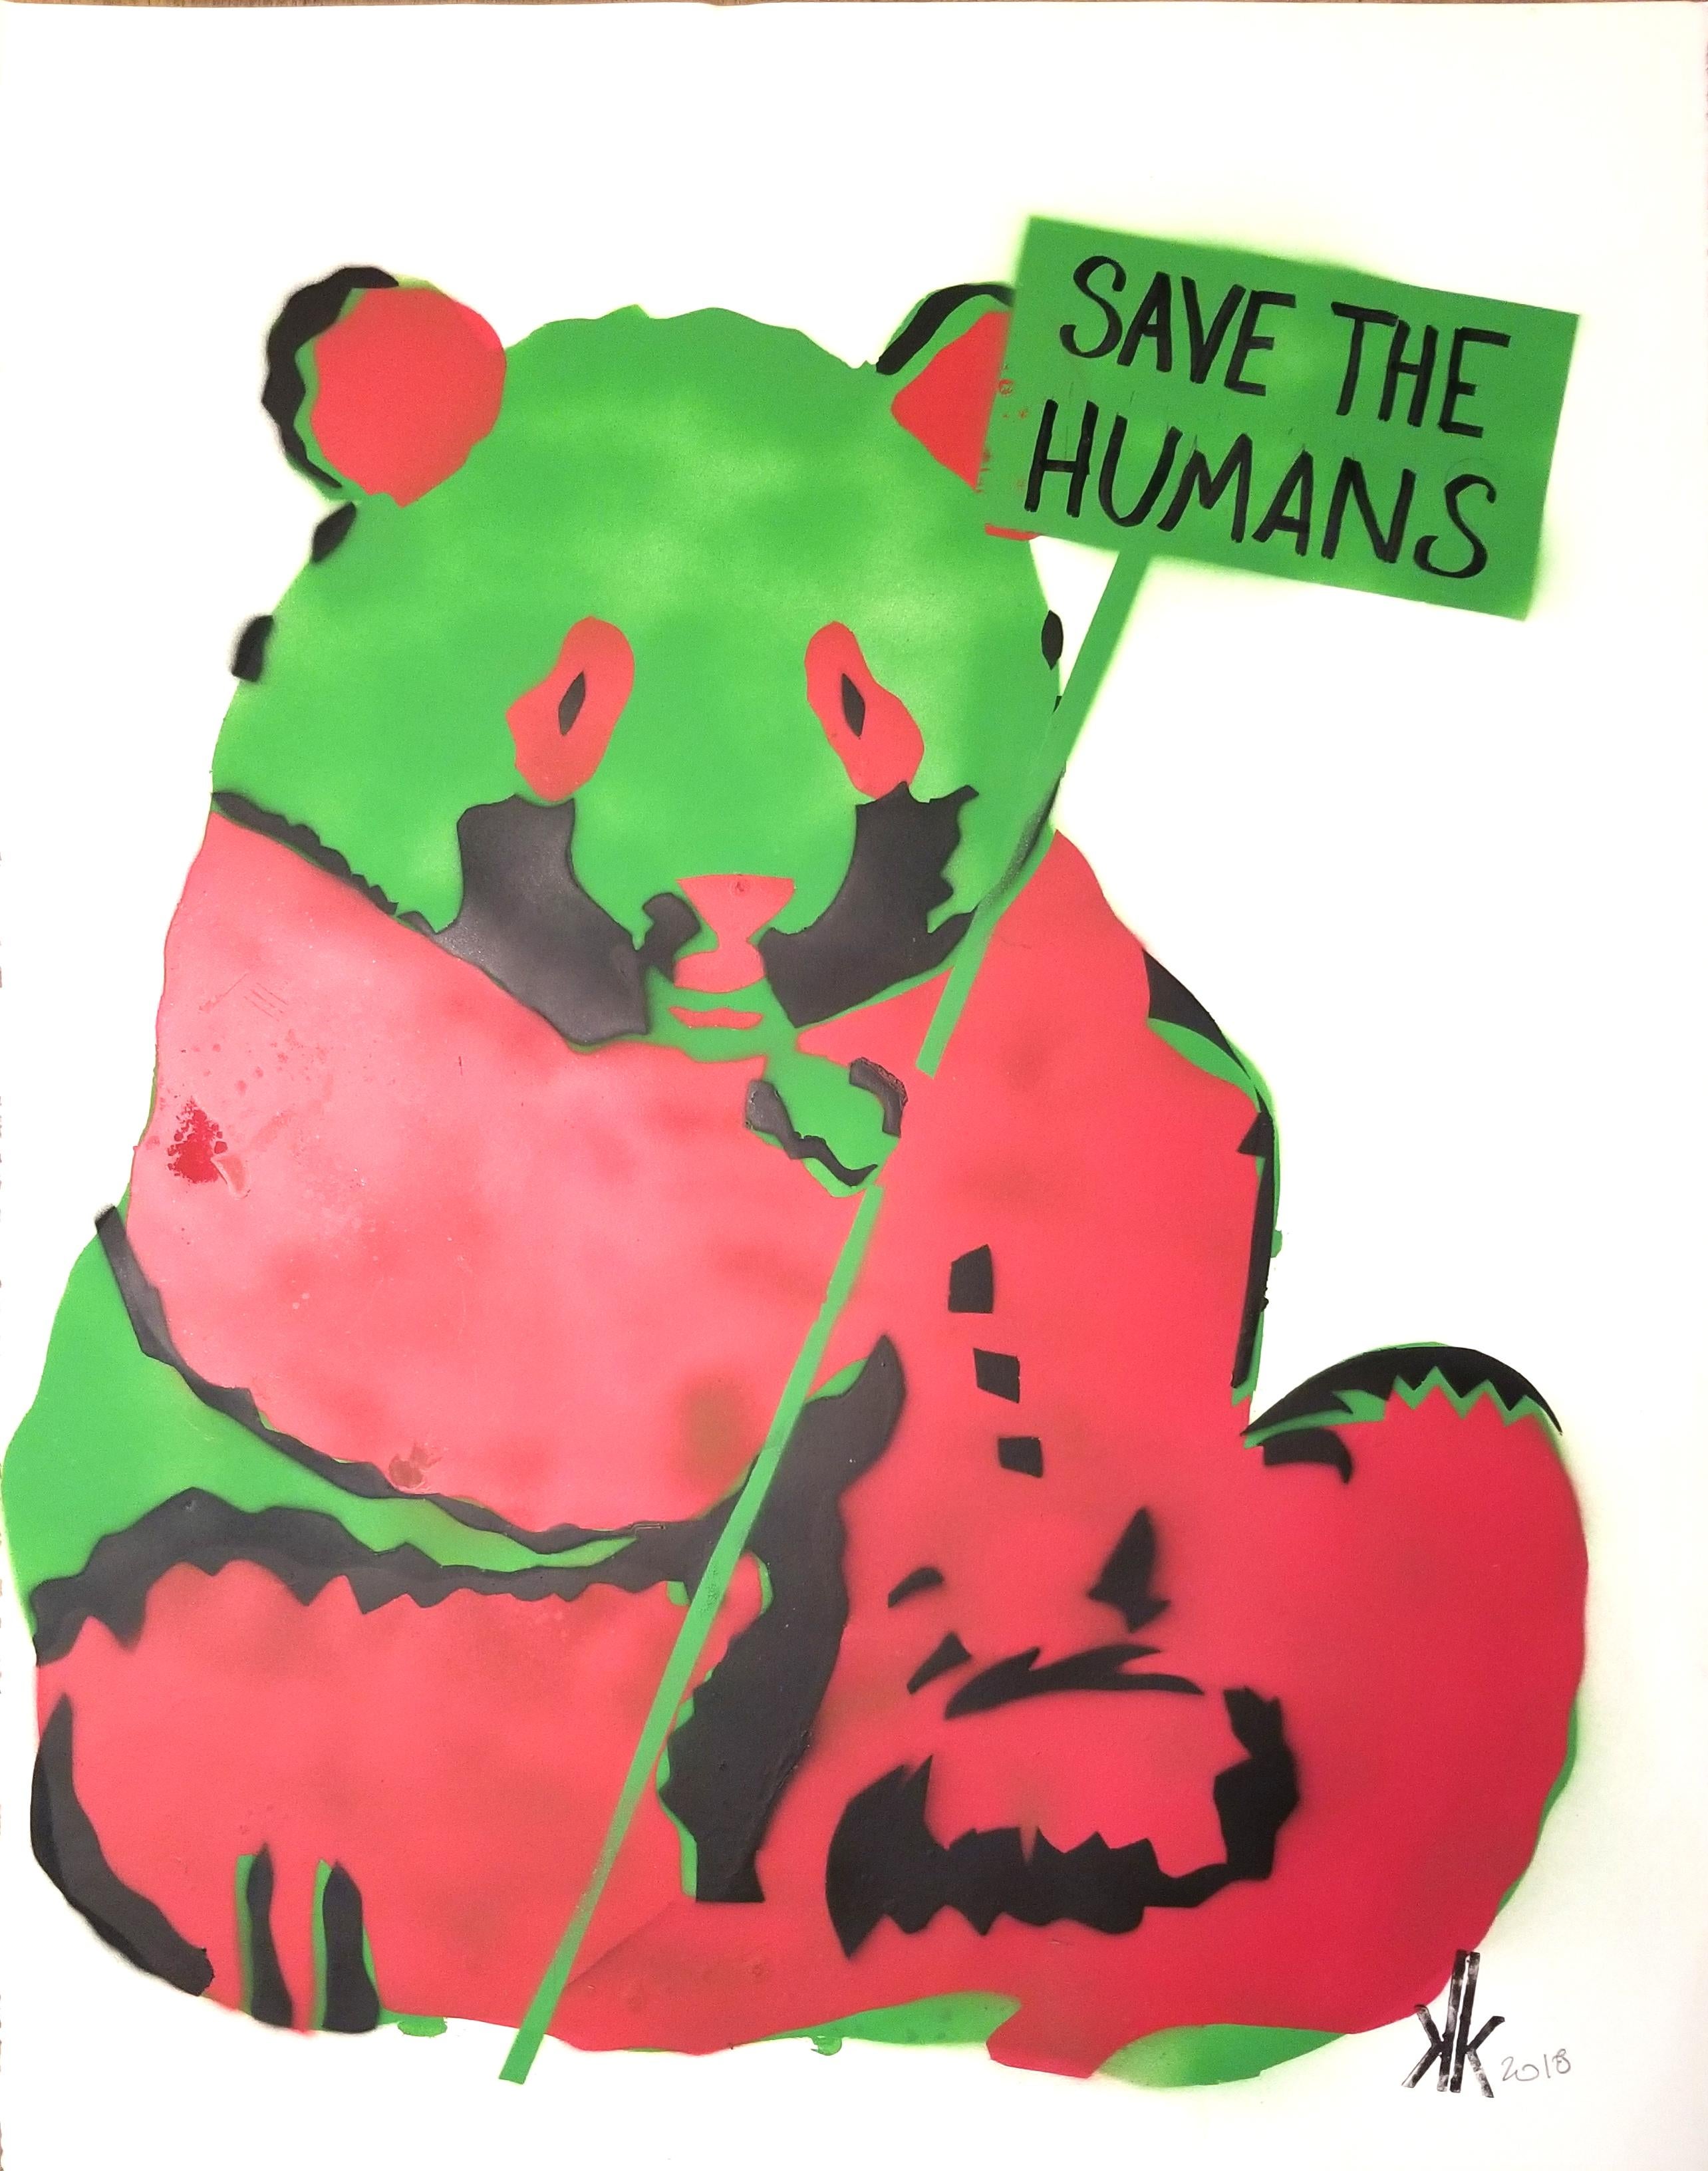 5 Layered Stencil Pink, Yellow, Blue
Political Panda Bear hold a Pink Sign saying We All Have A Voice
Unique pieces
This is on 90lb Paper color: Natural

New York Artist; K.K.